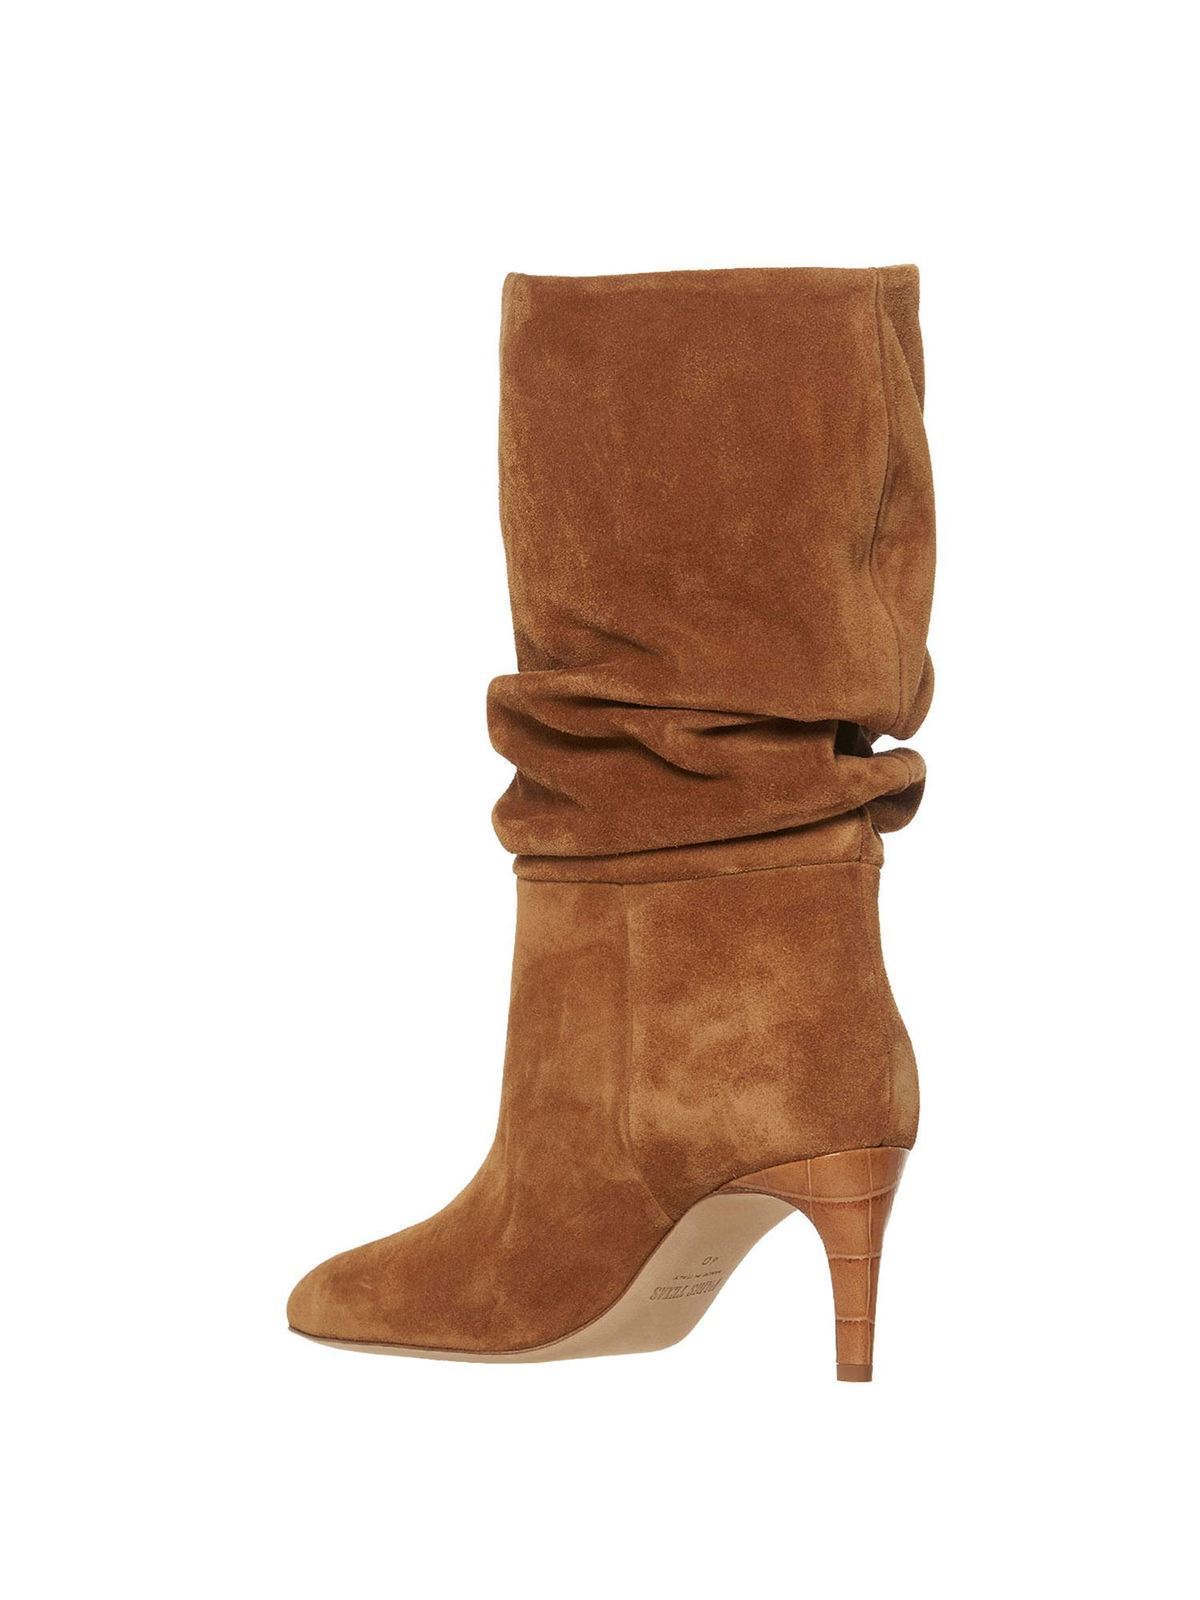 Slouchy boots in brown